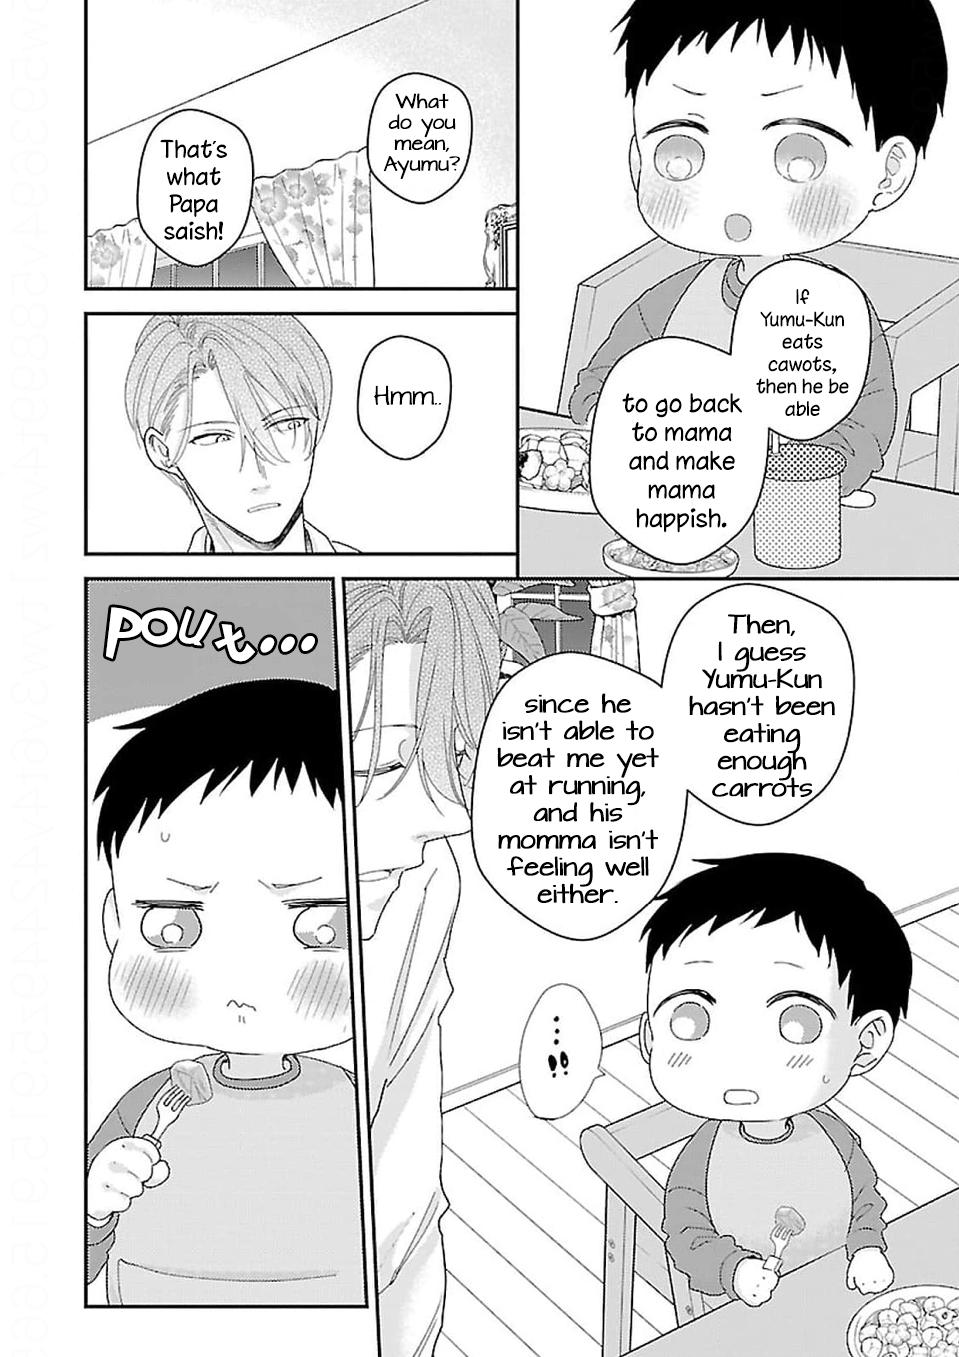 Back to School Ch.4 Page 9 - Mangago